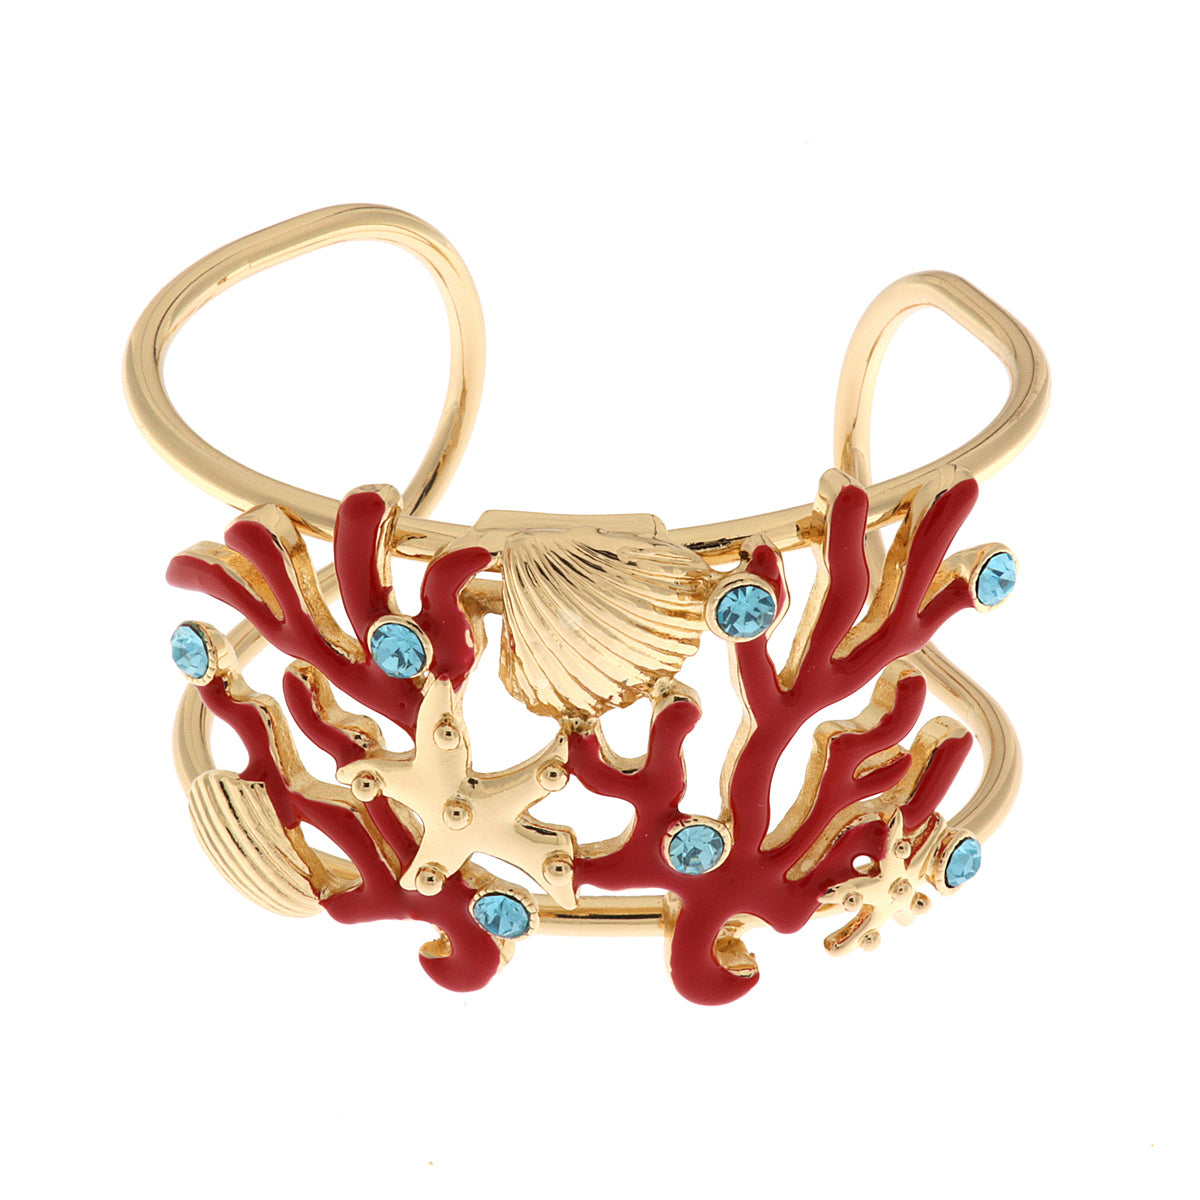 Marine -style metal bracelet with corals, starfish and shells